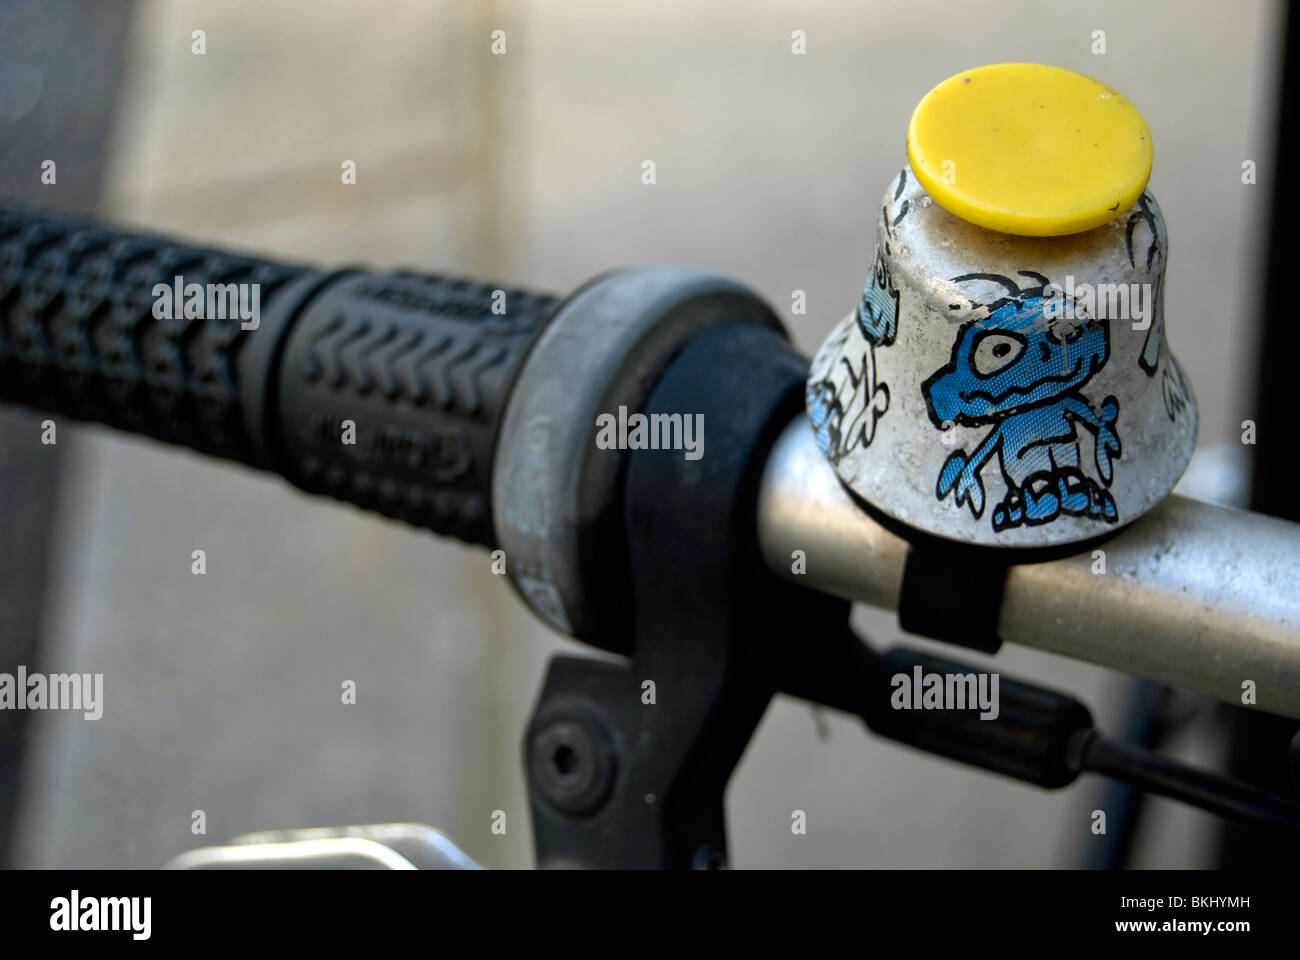 bike bell with pushbutton and cartoon chcracter images, seen on a parked bicycle in london, england Stock Photo